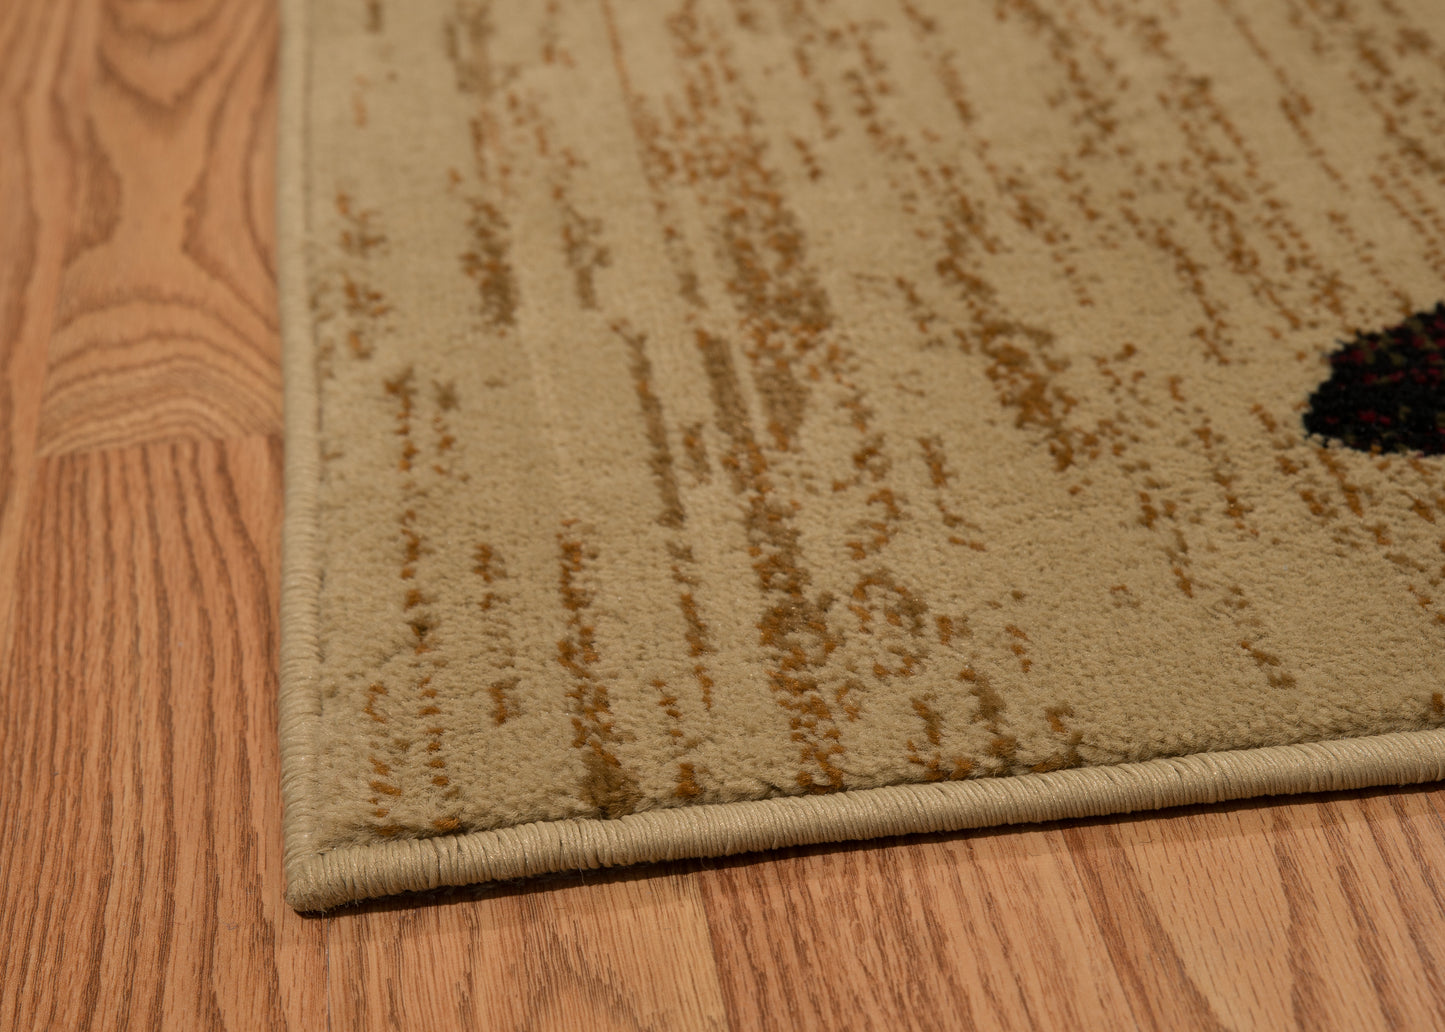 750-Valiant Synthetic Blend Indoor Area Rug by United Weavers